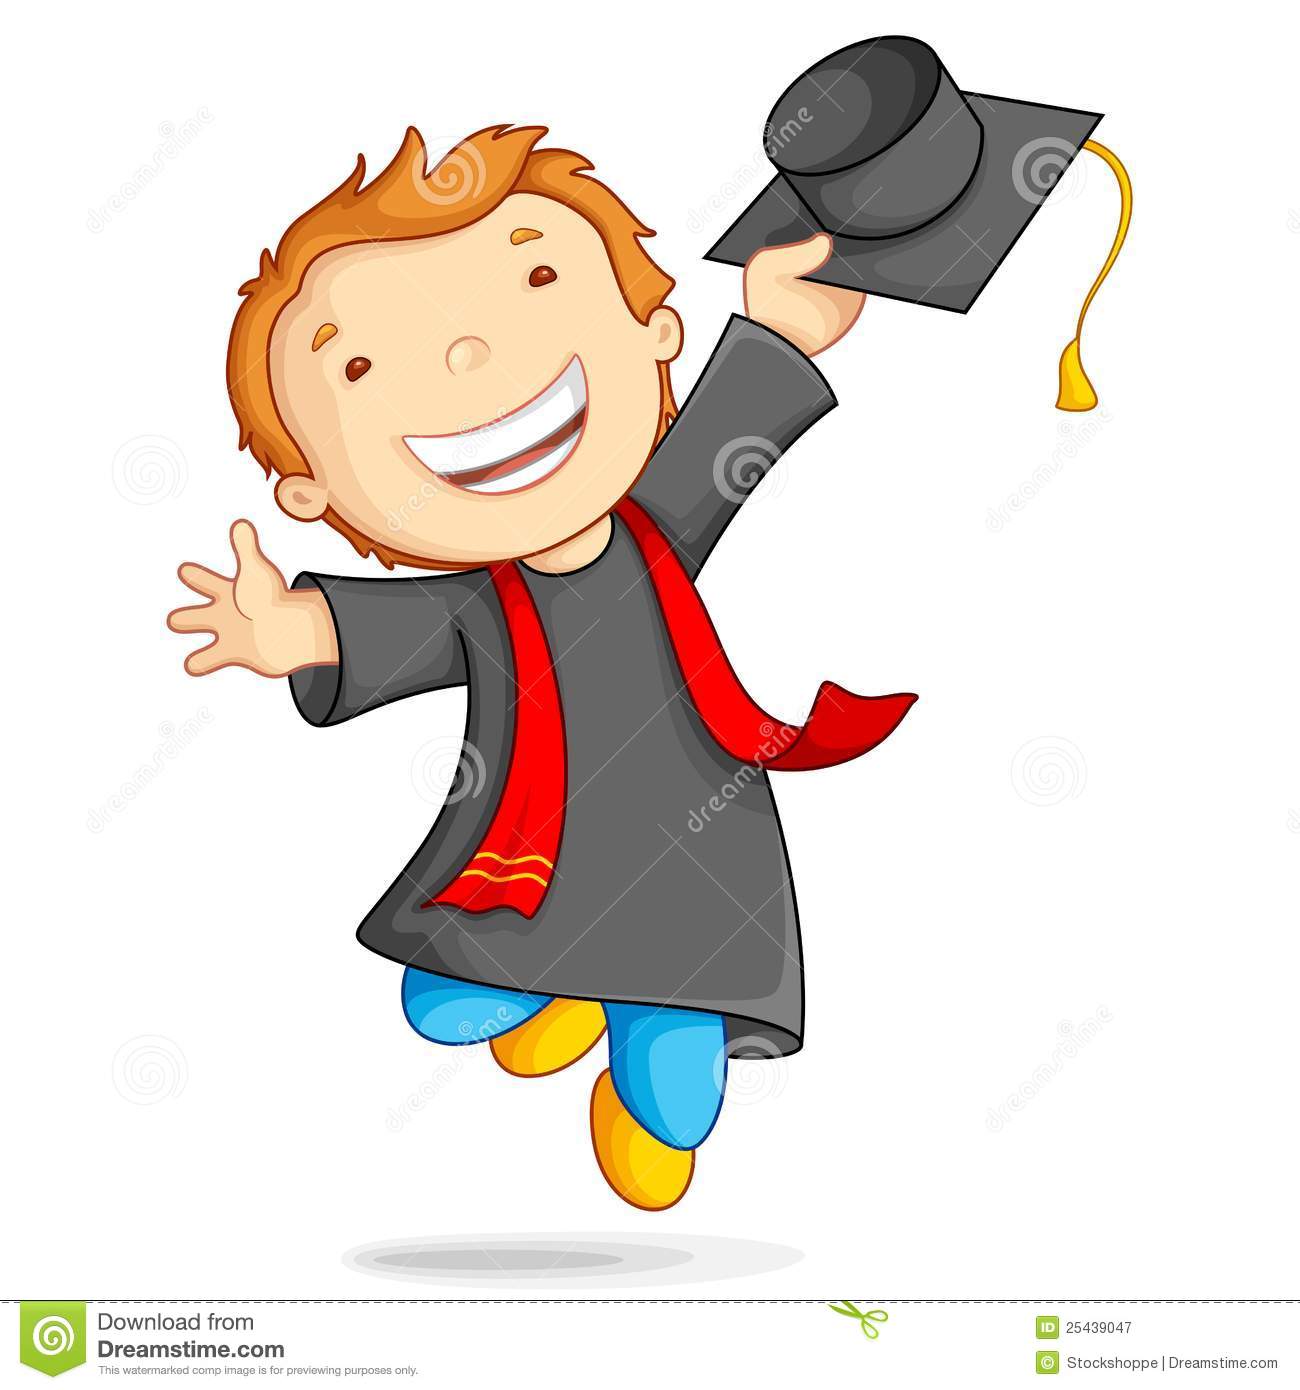 Boy In Graduation Gown Royalty Free Stock Photography   Image